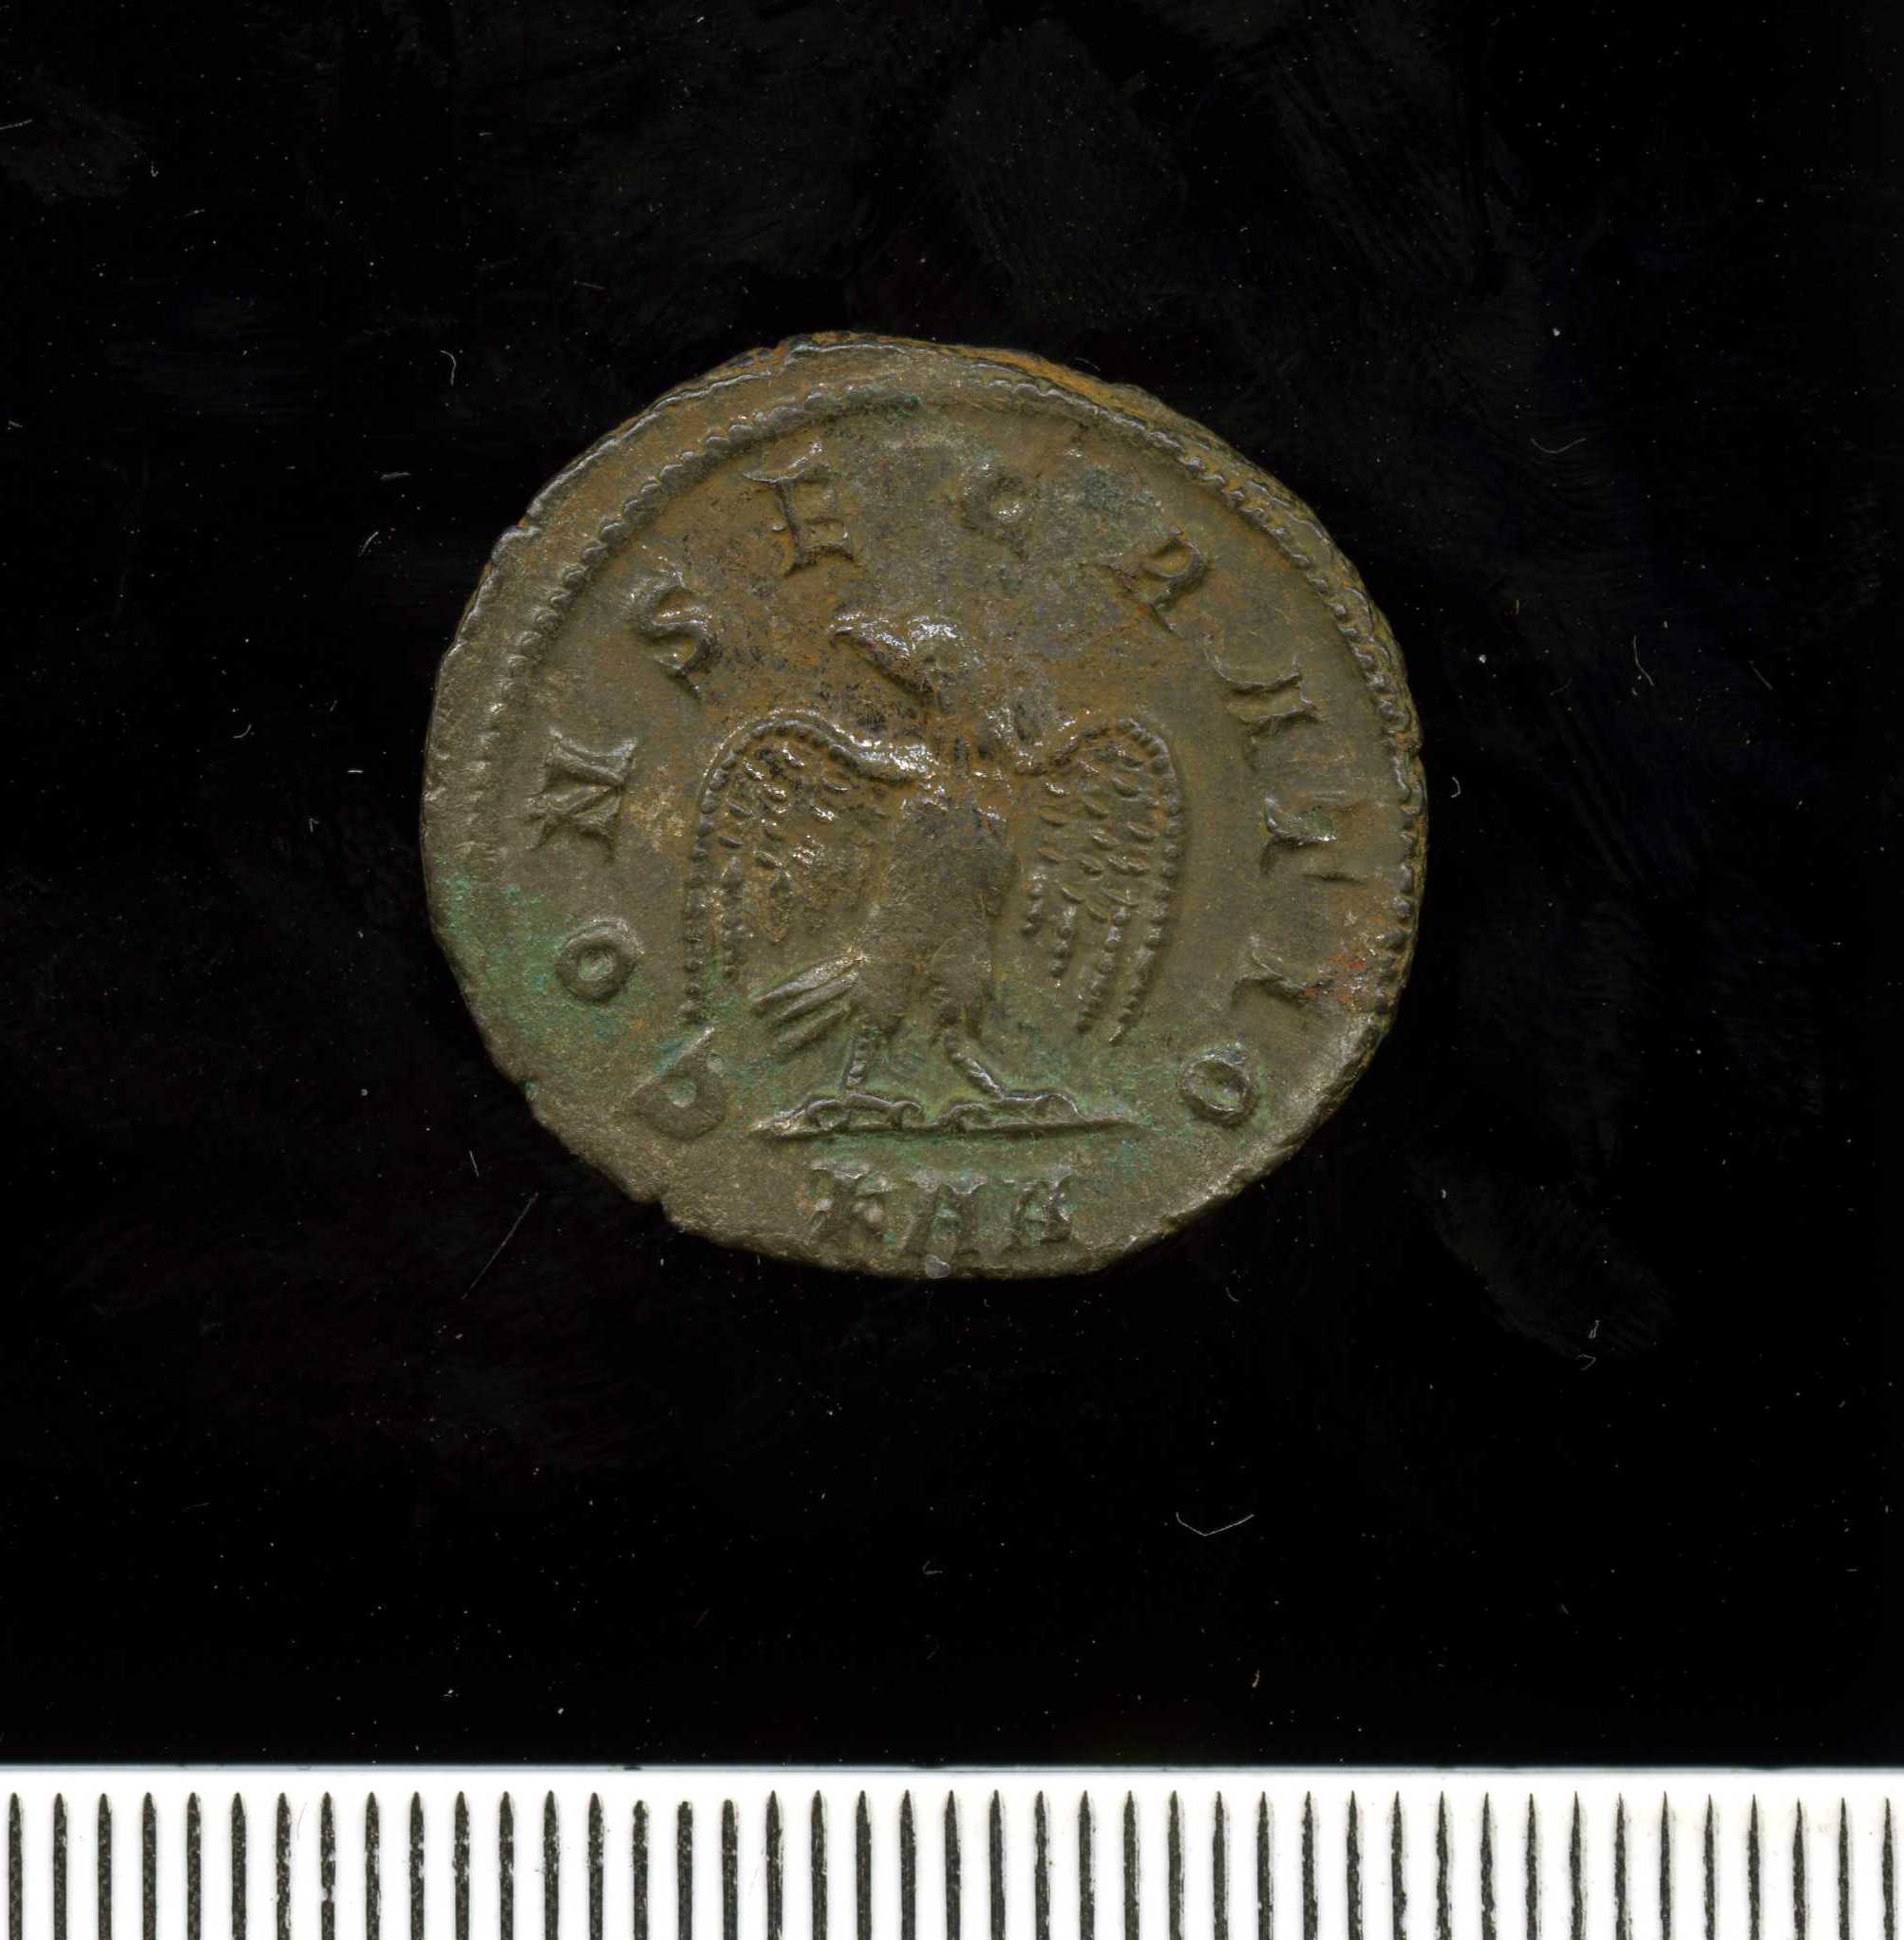 Silver-washed radiate of Divus Carus (11 2) Reverse